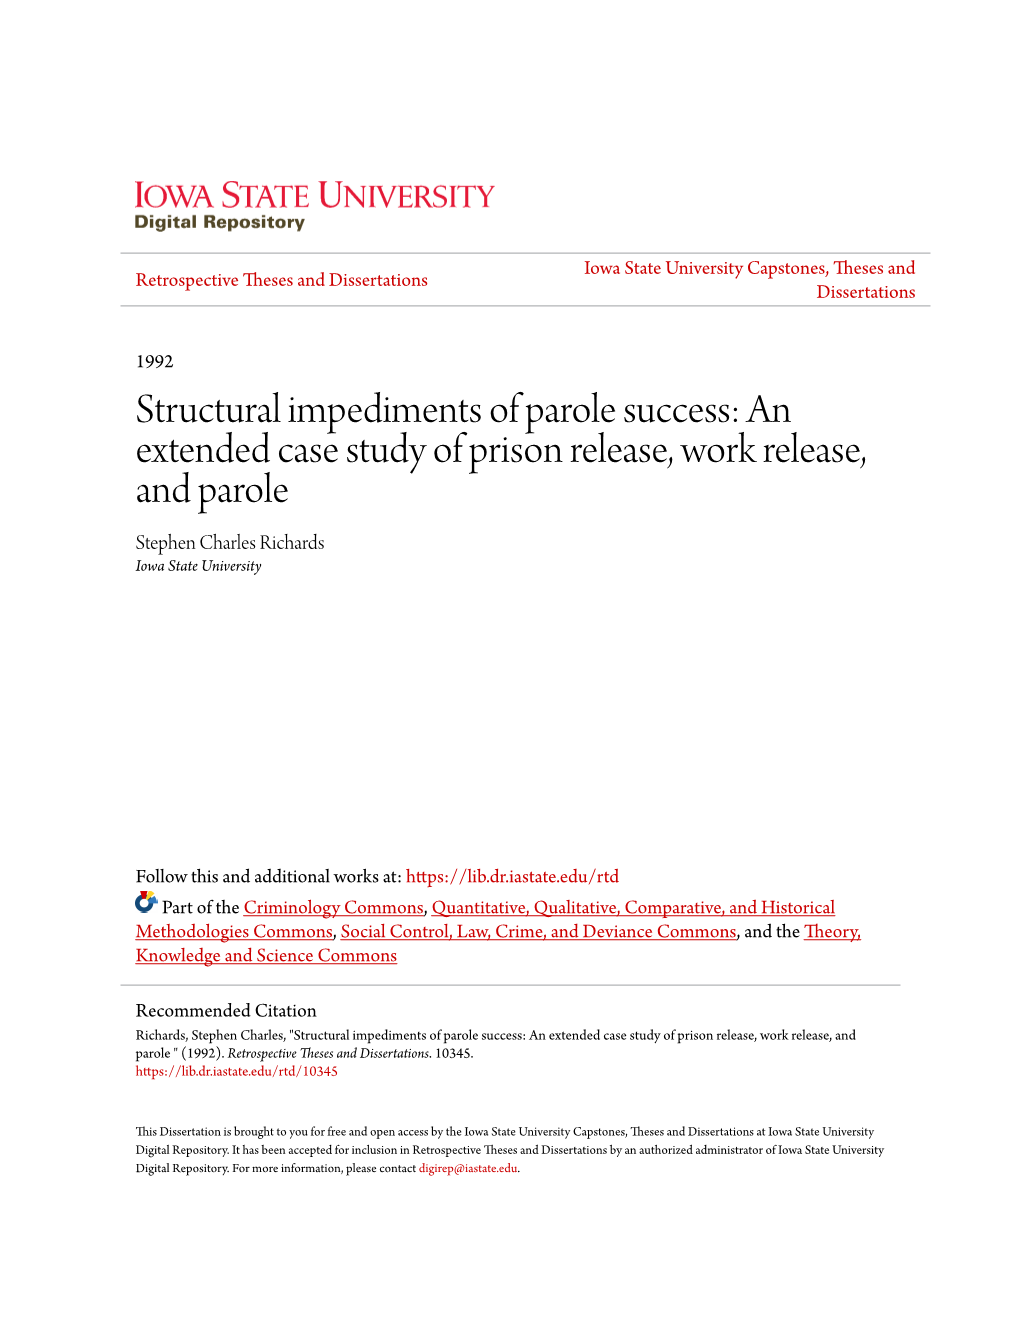 An Extended Case Study of Prison Release, Work Release, and Parole Stephen Charles Richards Iowa State University